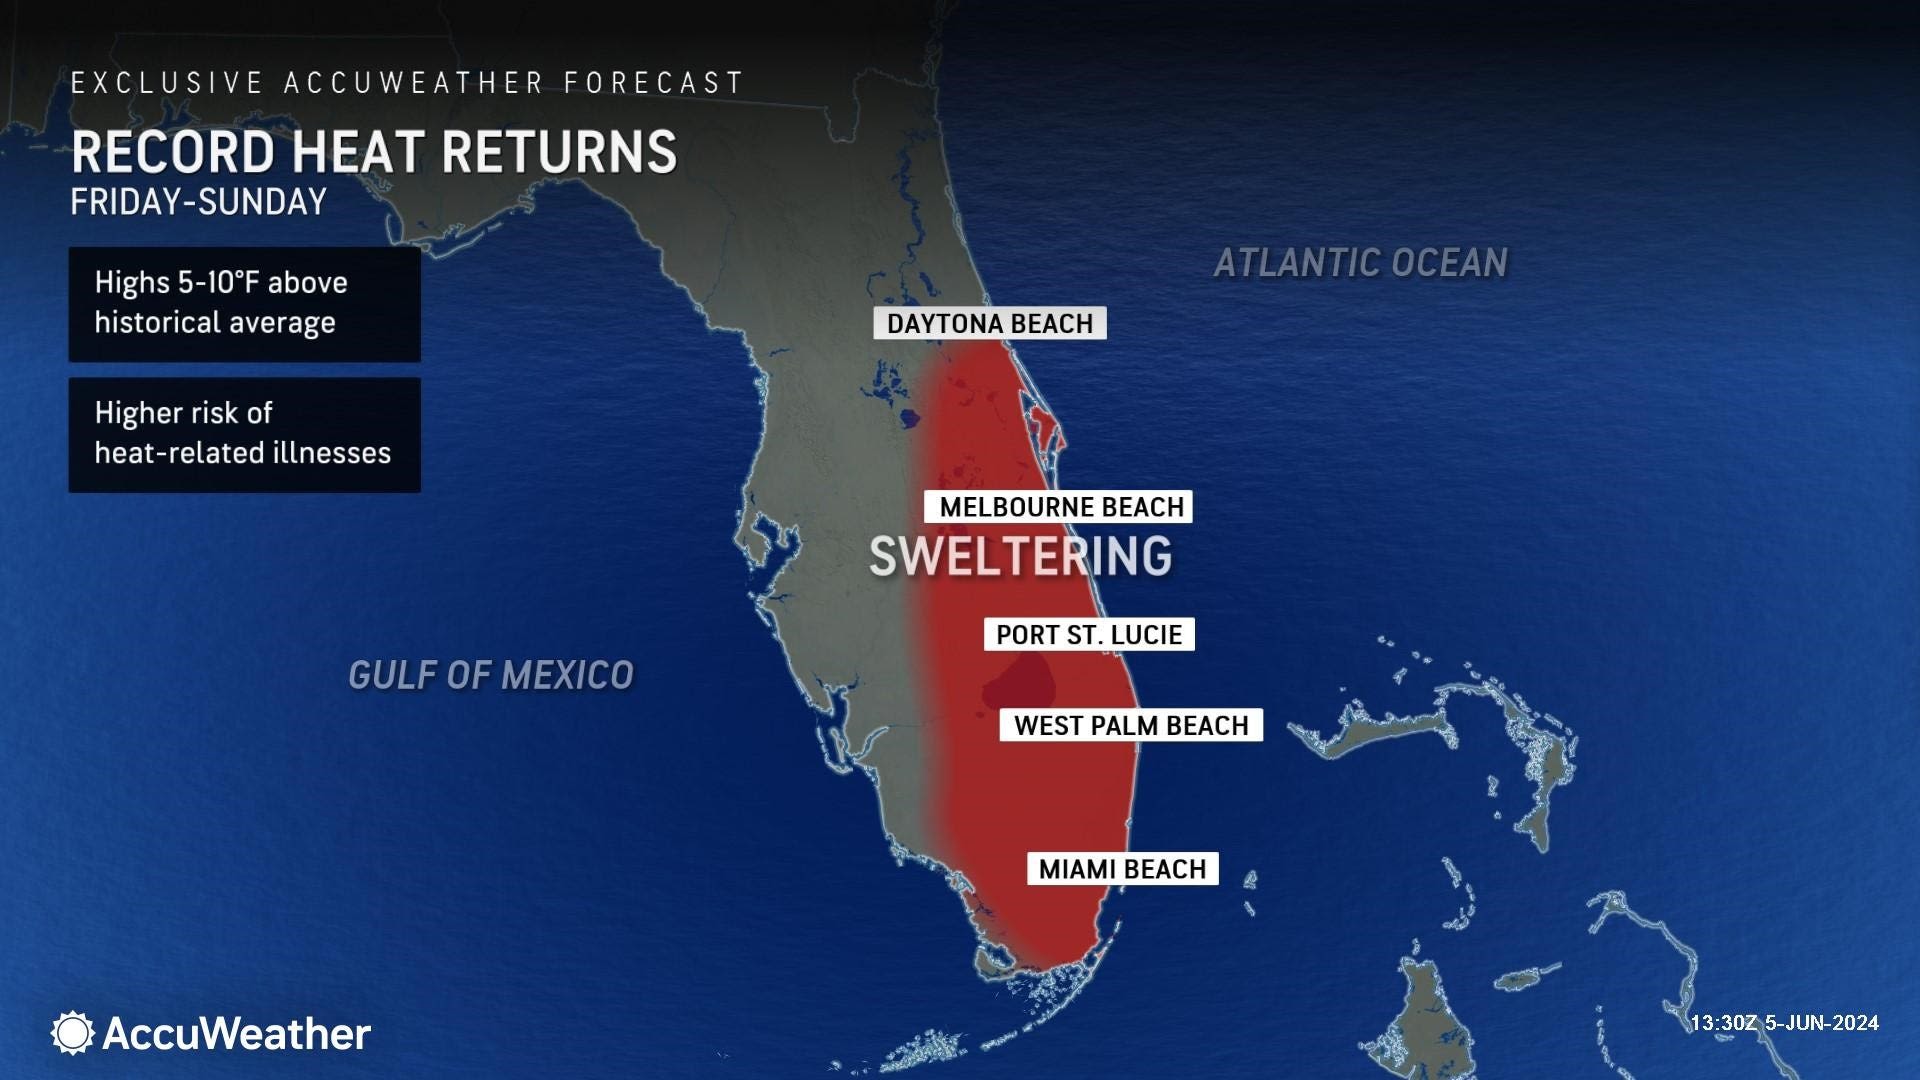 Florida could see record heat this weekend before tropical activity brings needed rain